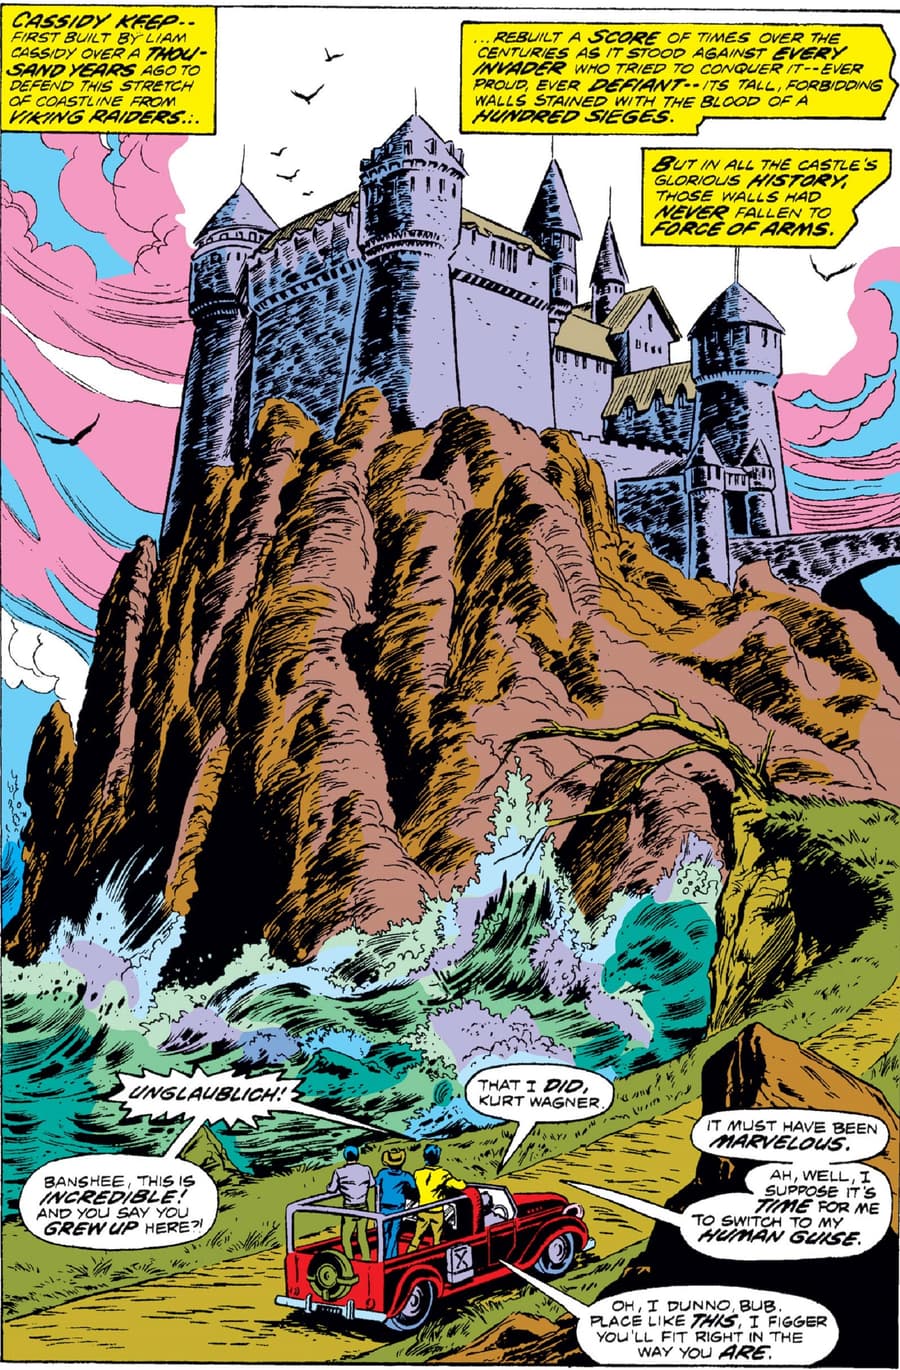 The magnificent Cassidy Keep castle in UNCANNY X-MEN (1963) #101.